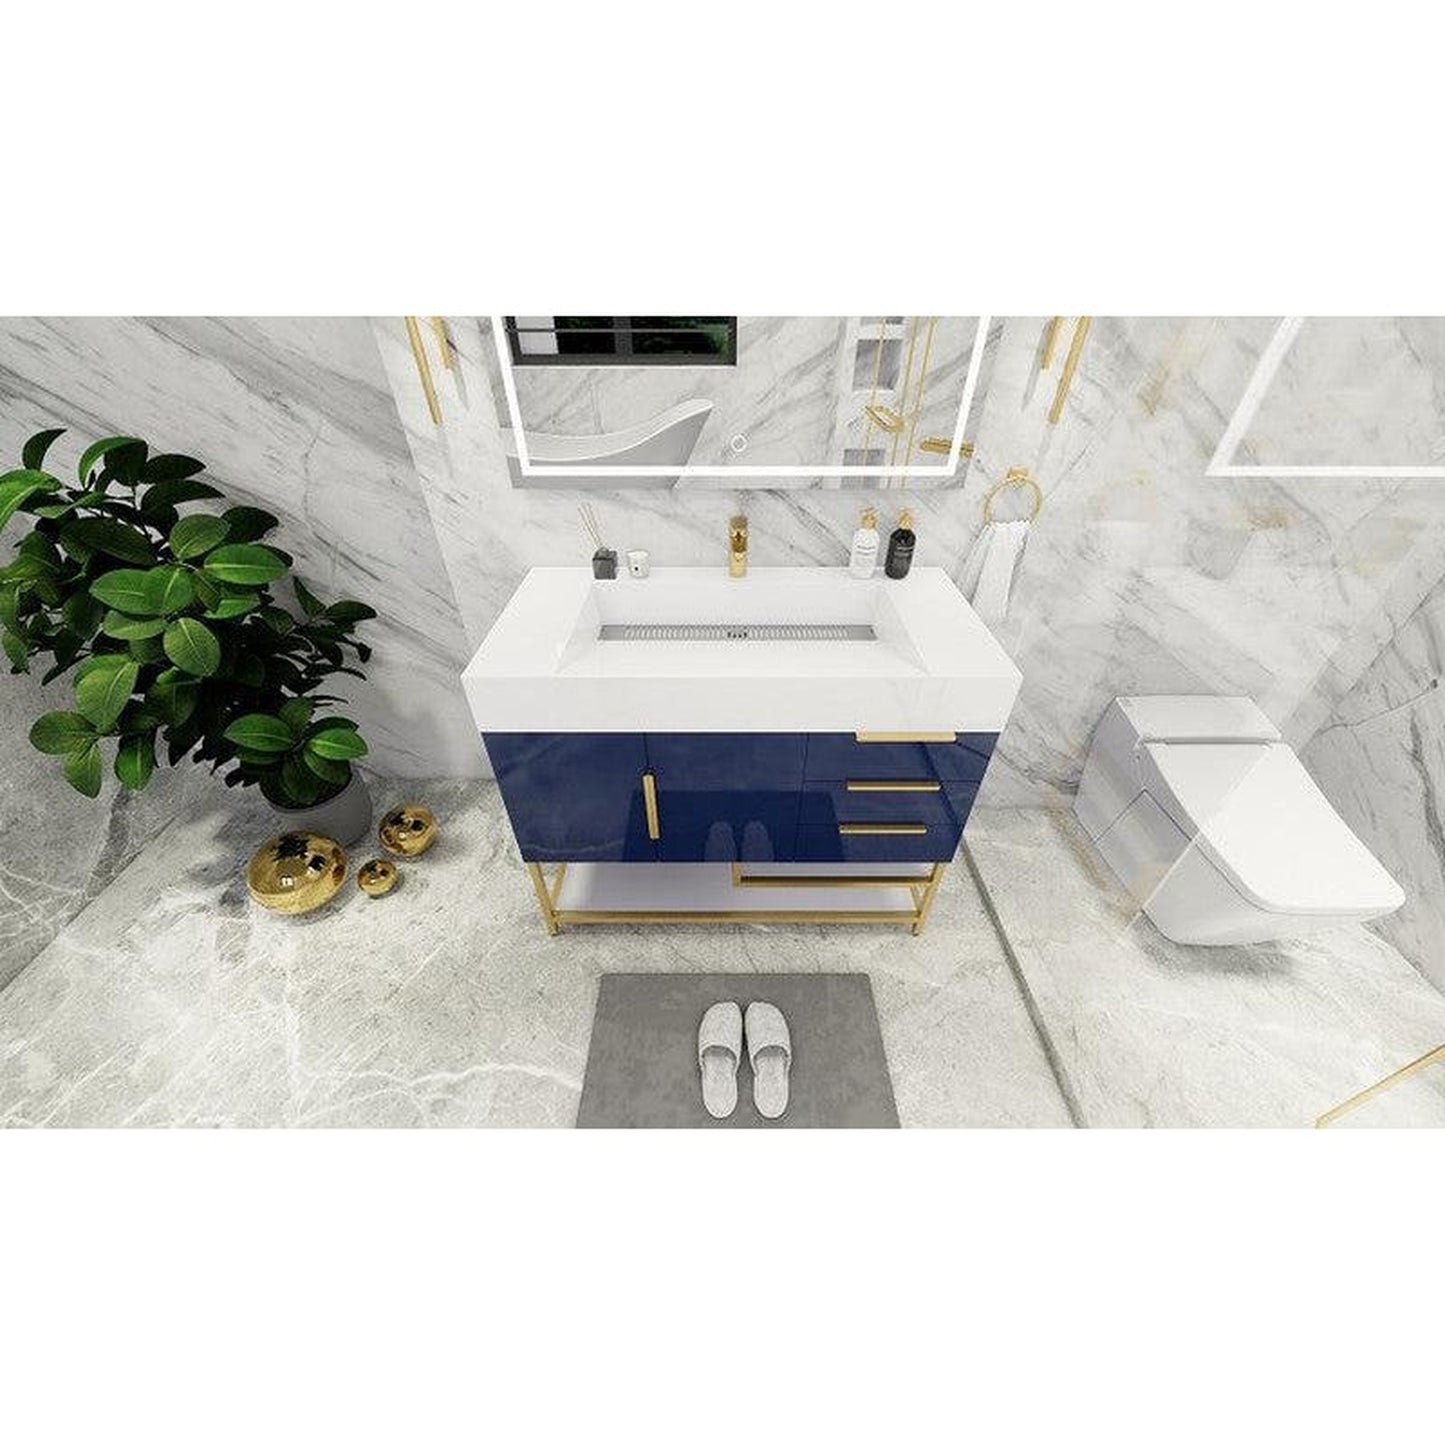 Moreno Bath Bethany 42" High Gloss Night Blue Freestanding Vanity With Right Side Drawers and Single Reinforced White Acrylic Sink